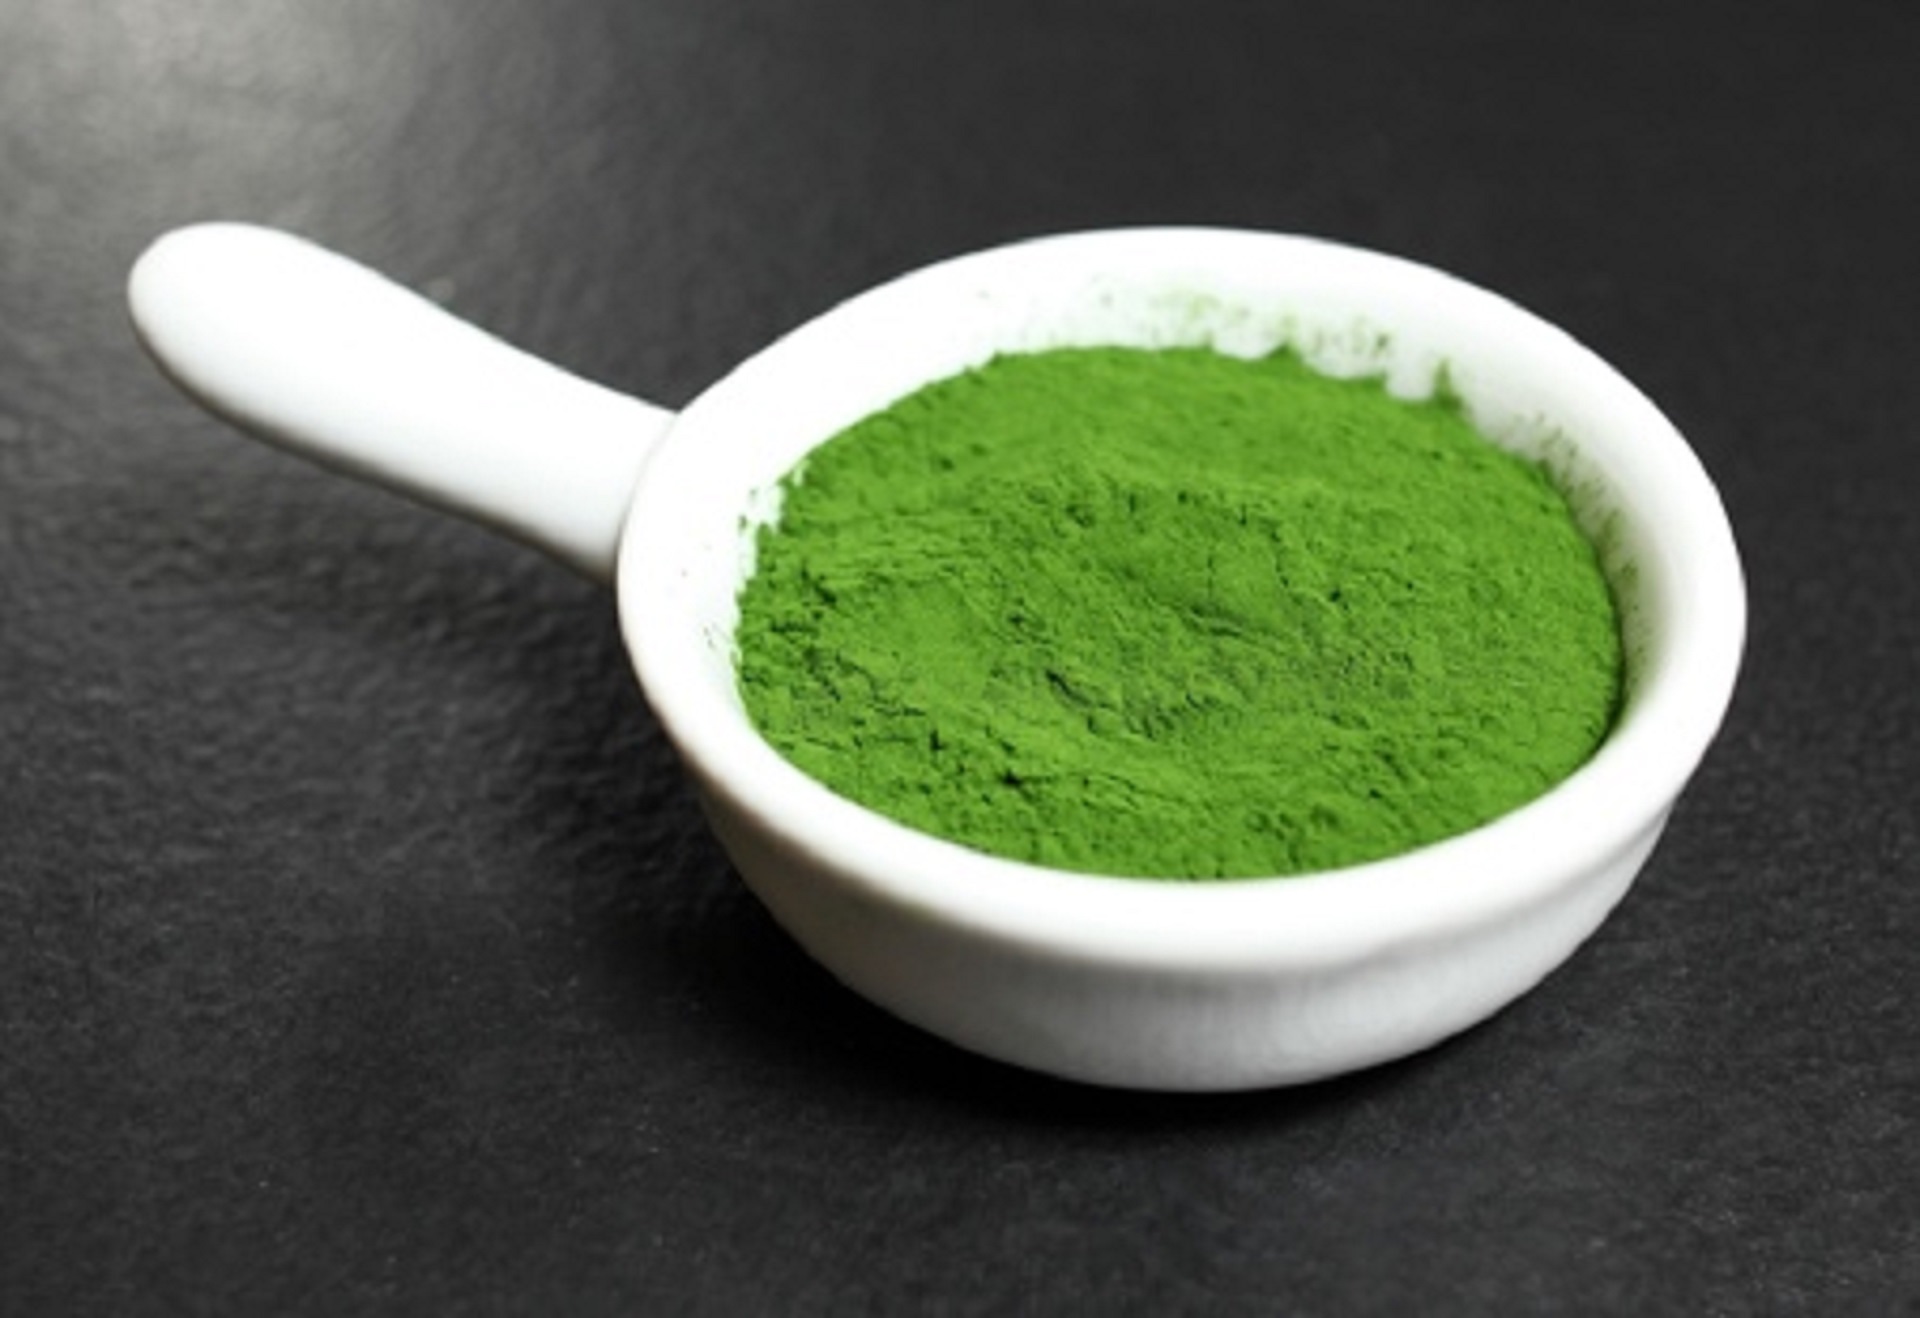 Food Ingredients First | Allma to Showcase New Concepts With Chlorella at HiE